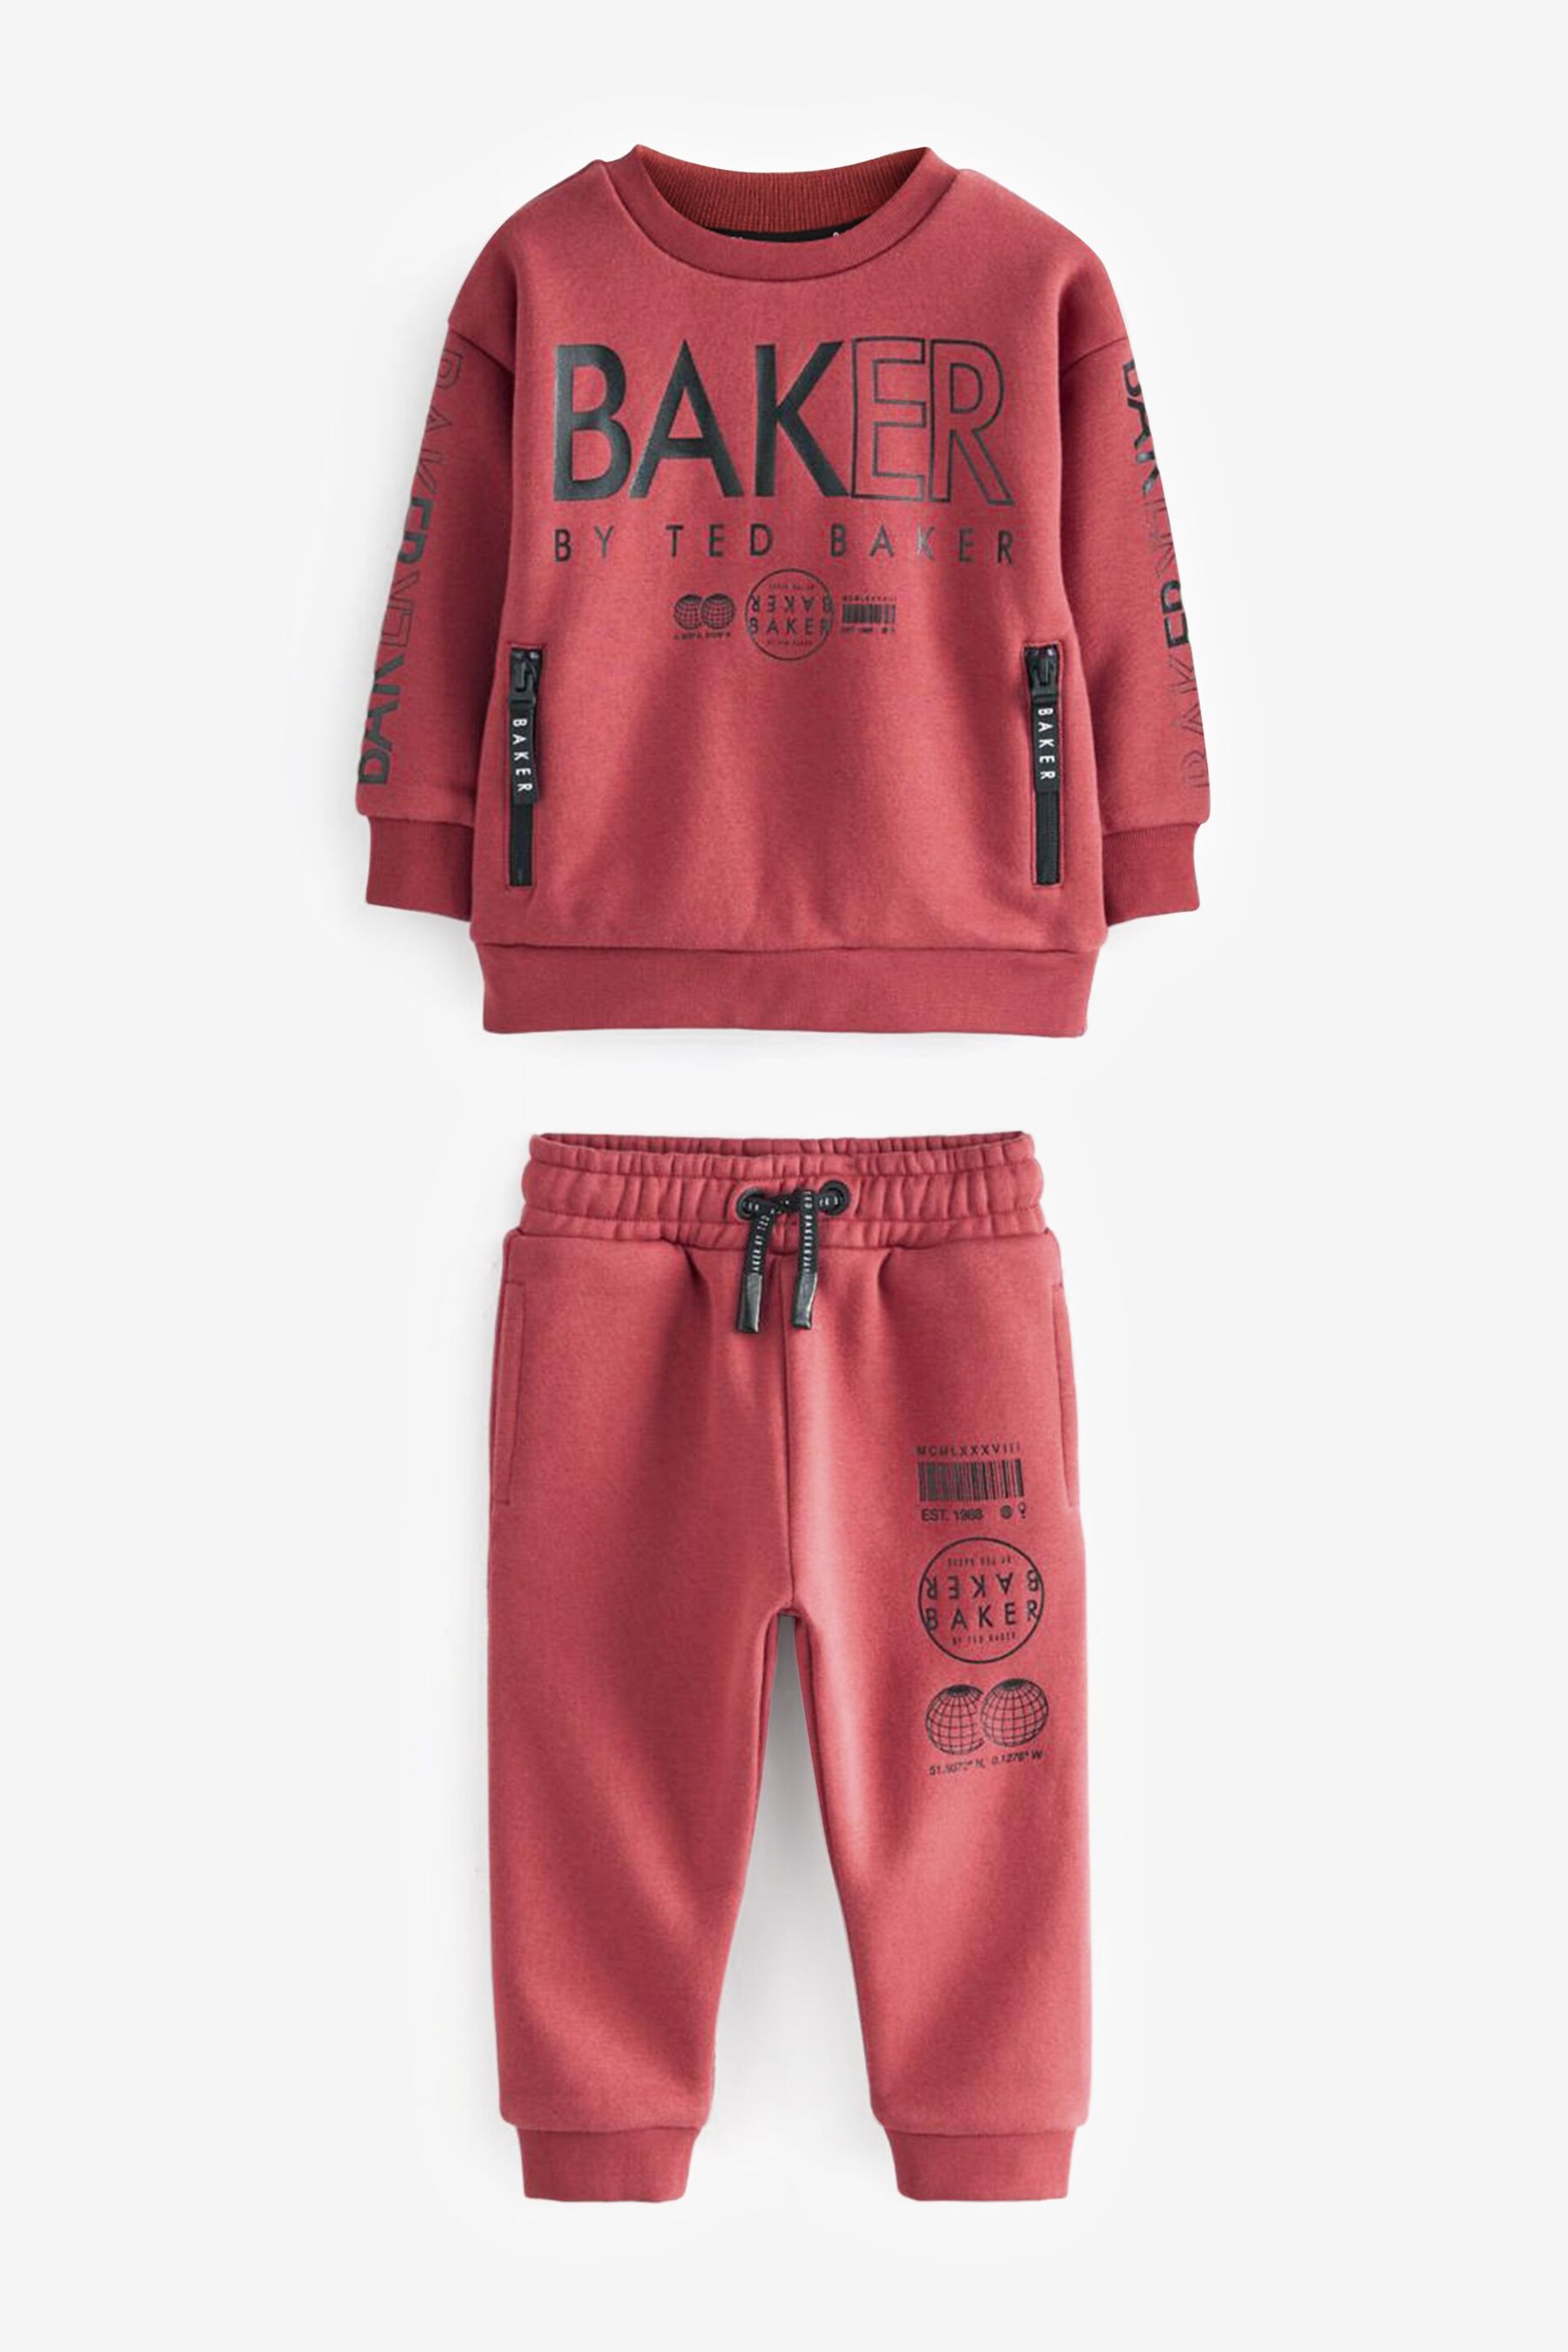 Baker by Ted Baker (0-6yrs) Letter Sweater and Jogger Set - Image 6 of 11